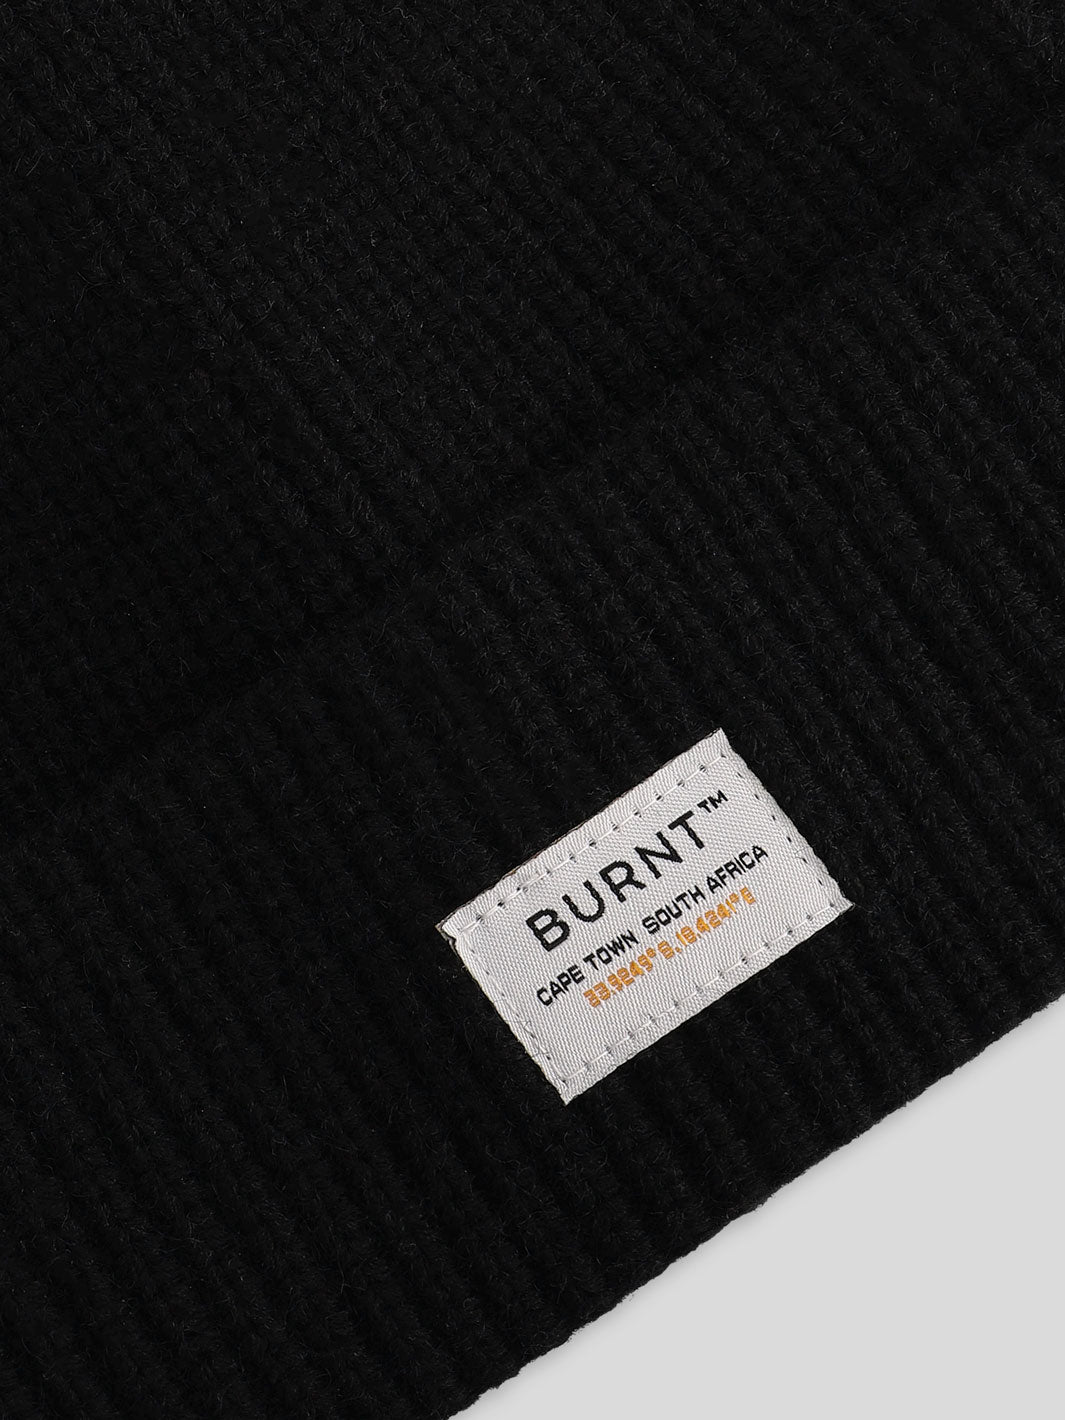 Moscow Beanie in black - close view